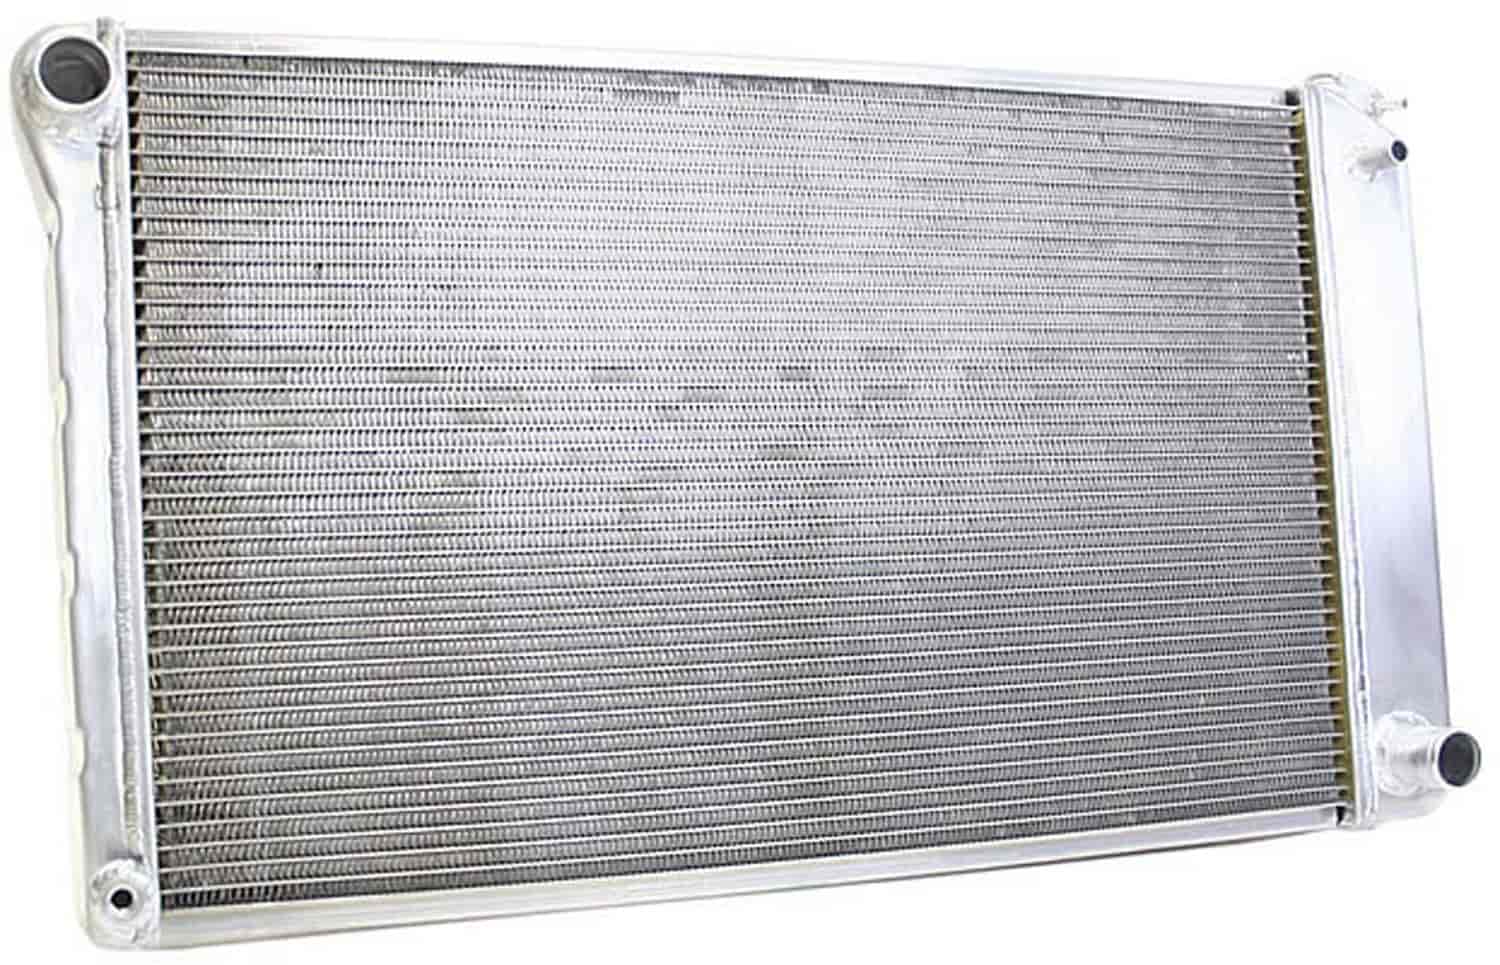 ExactFit Radiator for 1967-1987 Chevy/GMC Pickup Truck, Blazer, Jimmy & Suburban with Small Block Chevy/L6